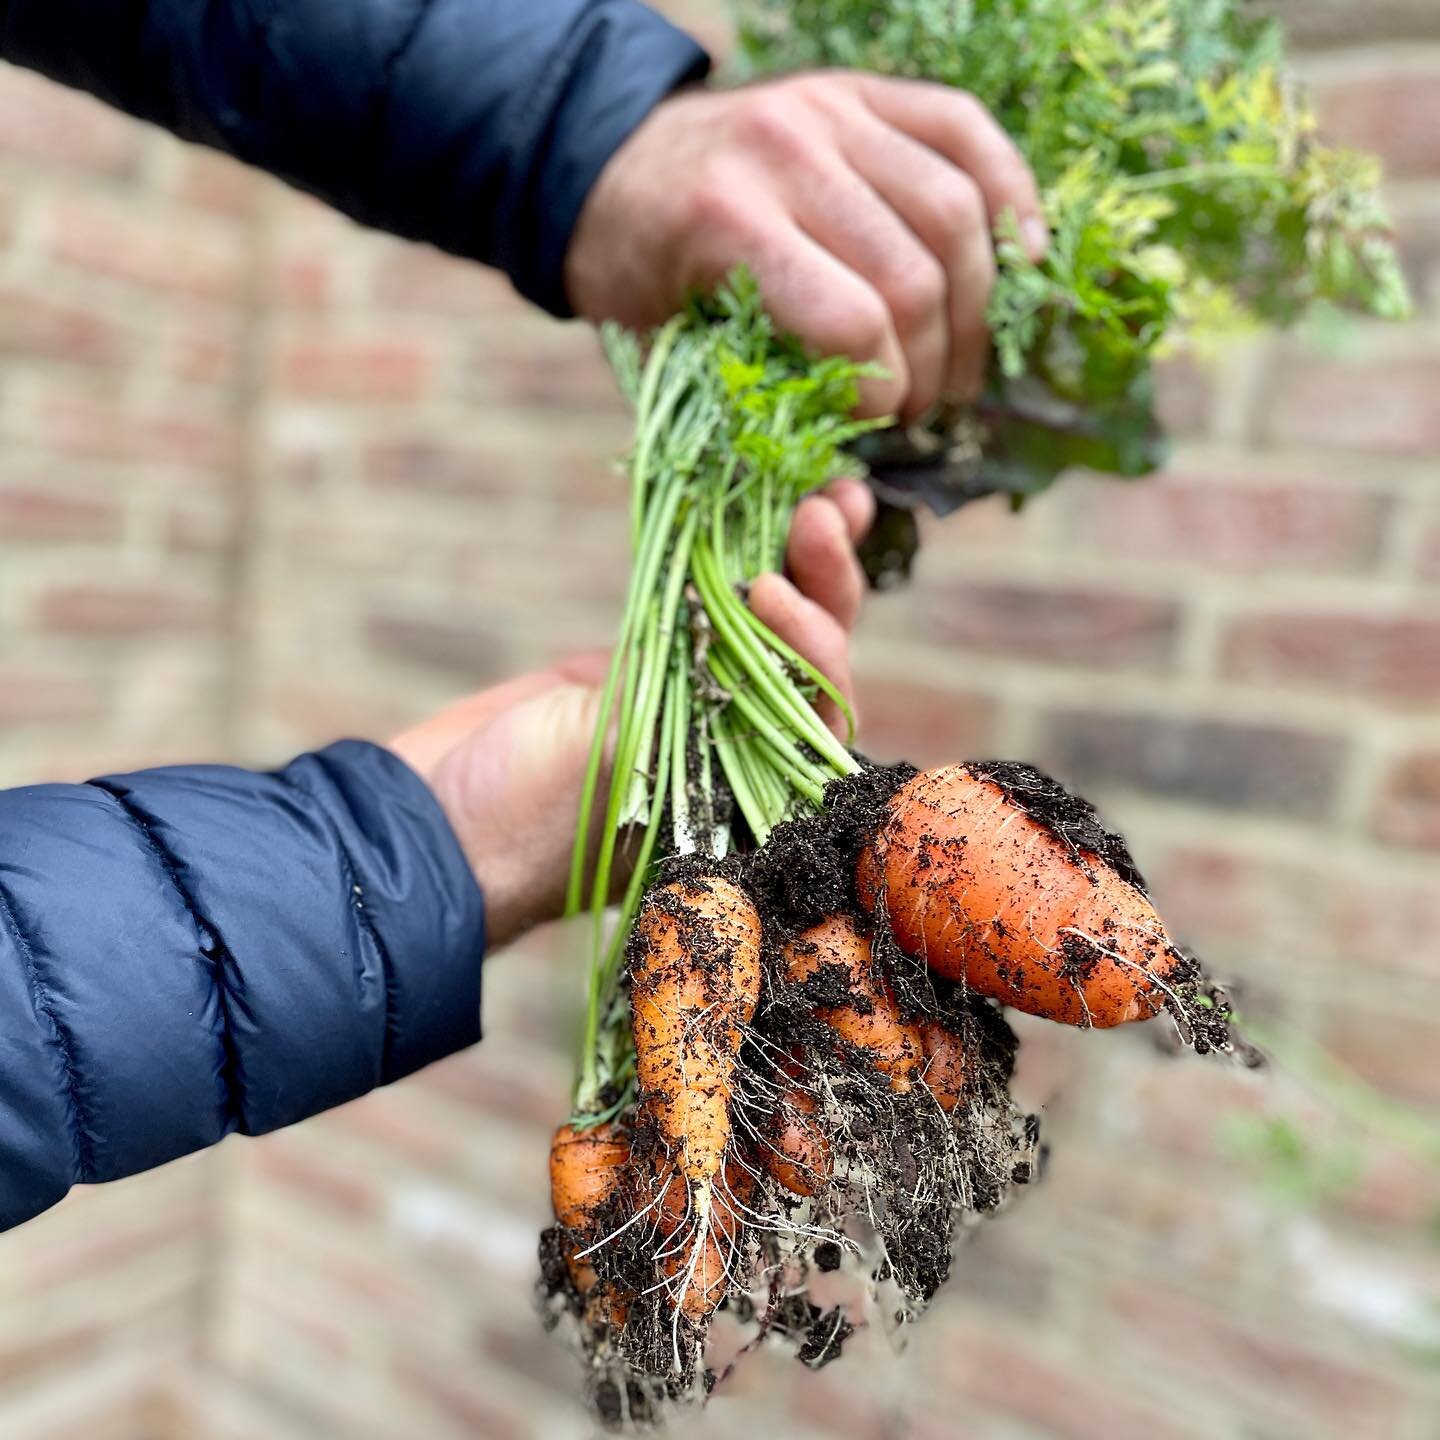 We&rsquo;re learning how to grow our own organic food and produce 🥕 🥬 in front of @thelondonfitclub 
|
|
|
|
|
|
|
|
|

#organic #vegan #natural #healthy #skincare #healthyfood #health #healthylifestyle #food #nature #beauty #plantbased #love #well